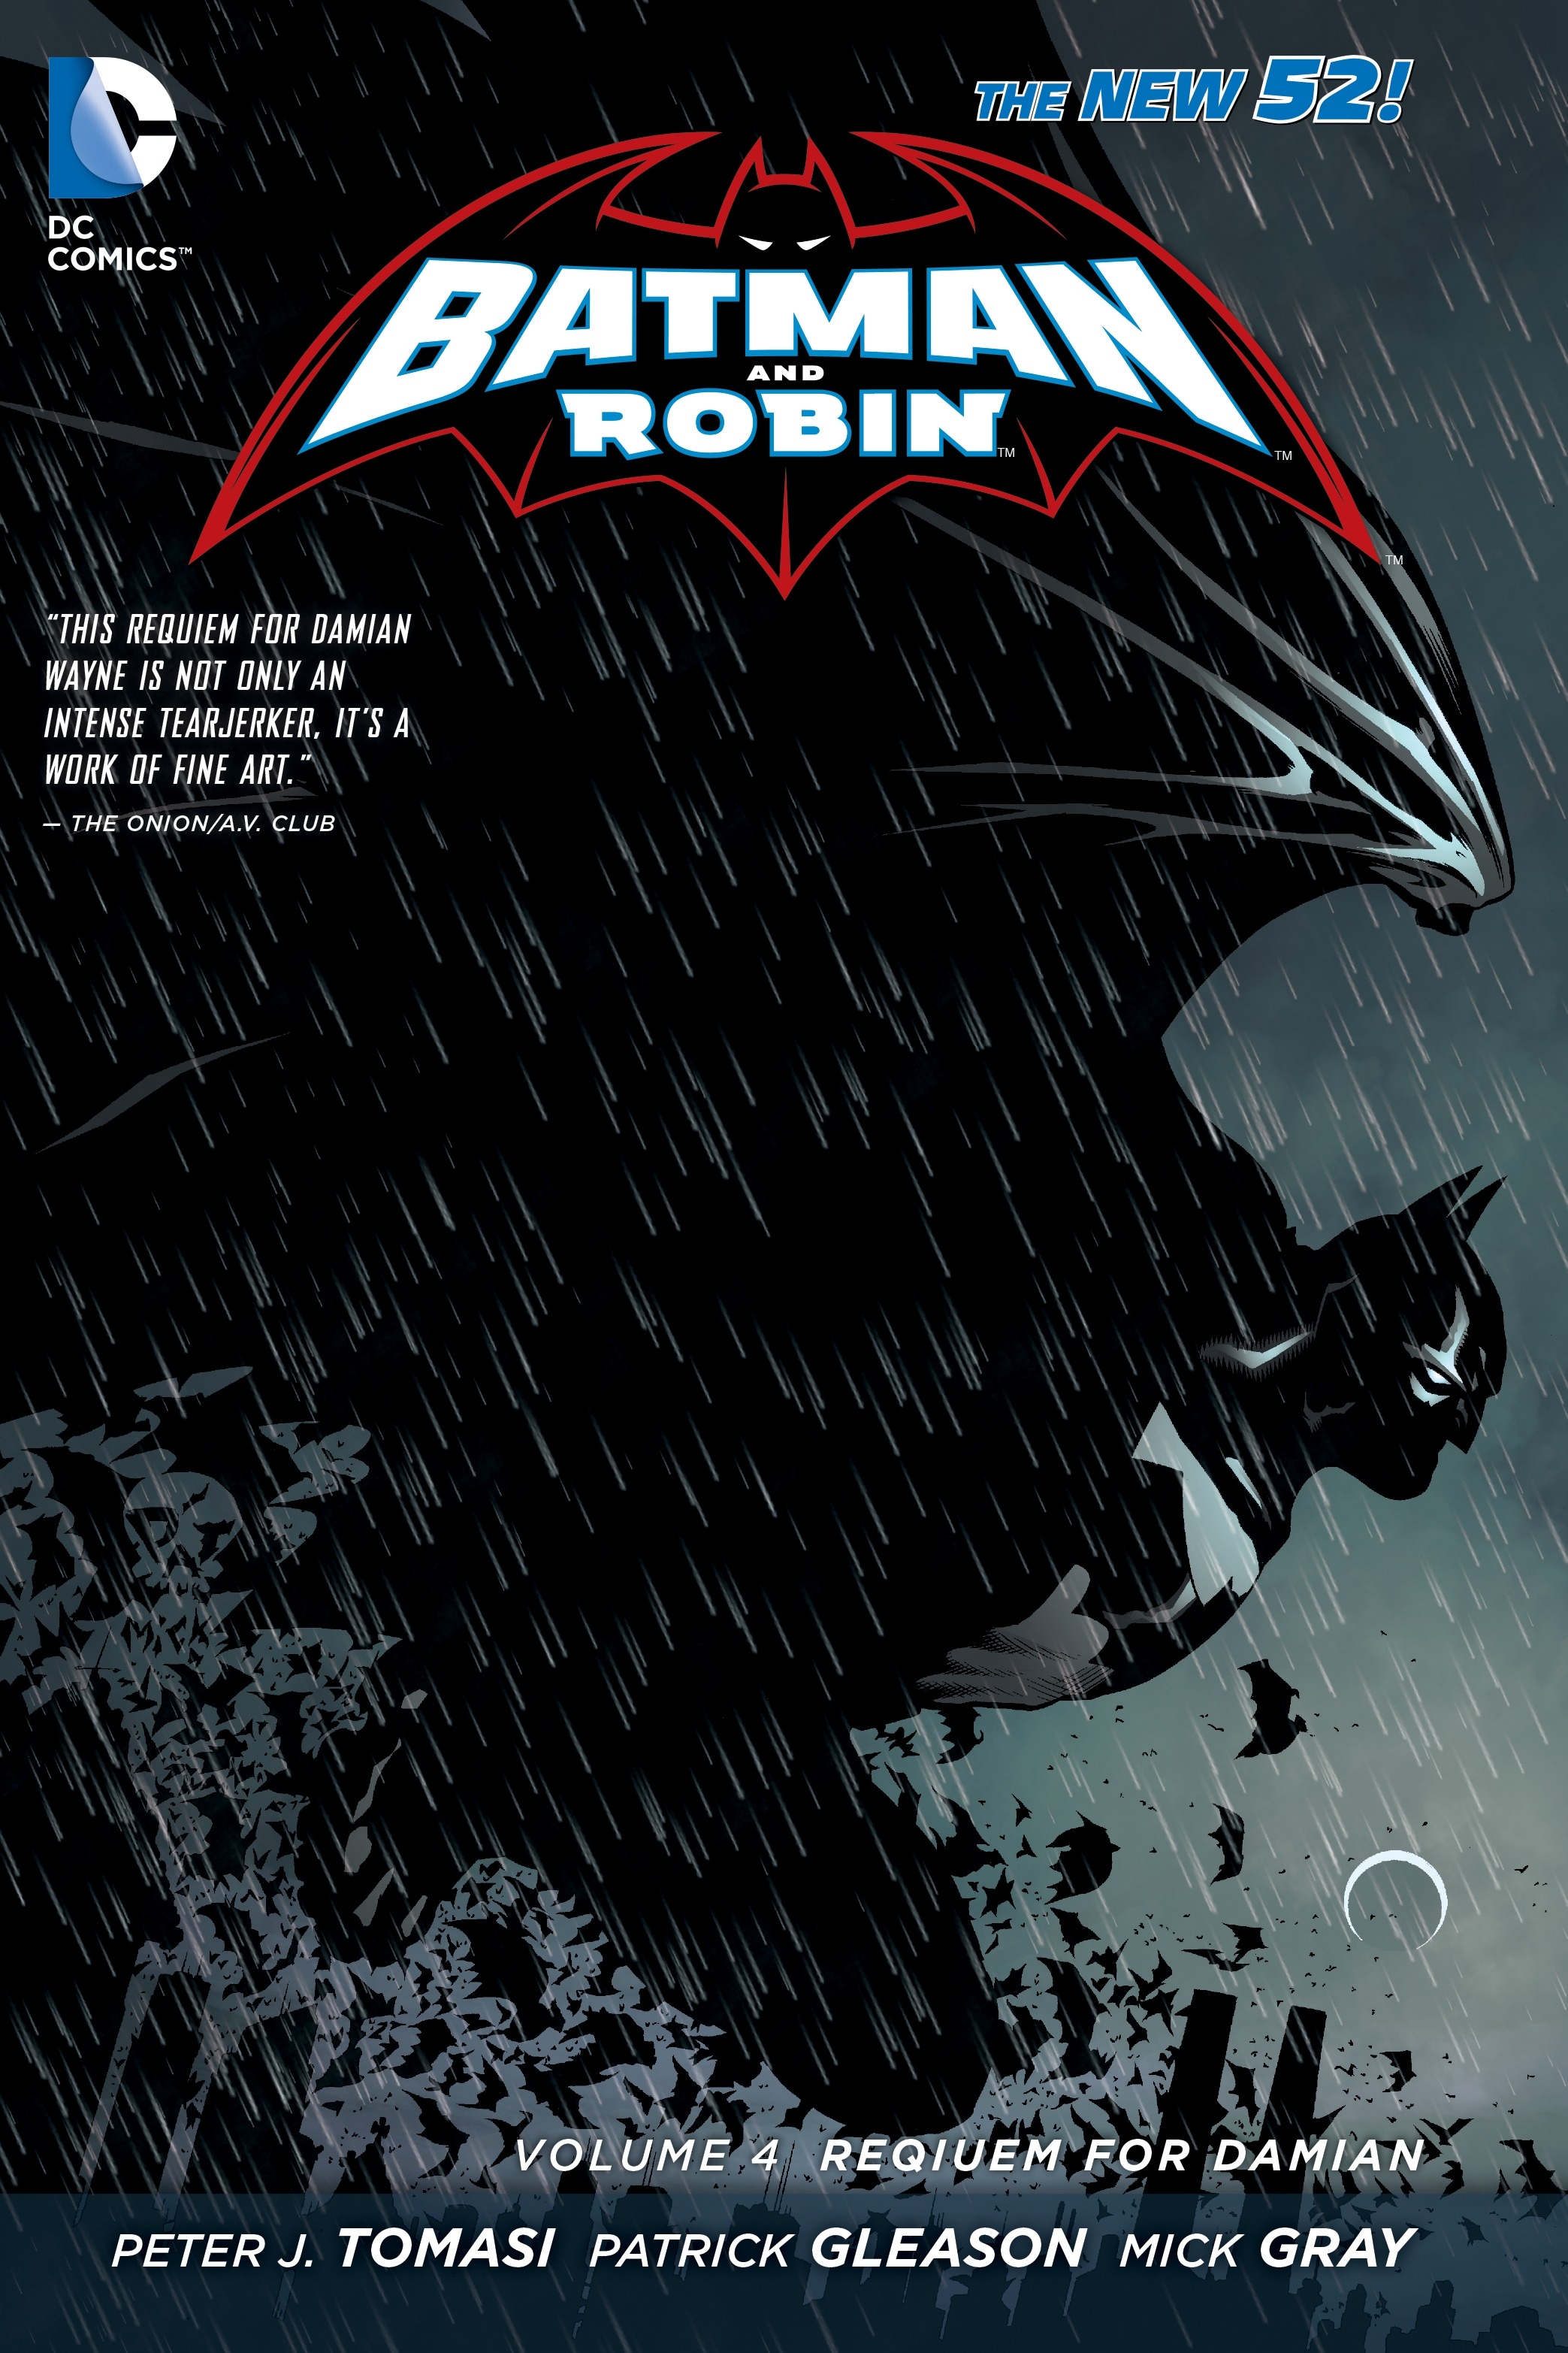 Batman and Robin Vol. 4 Requiem for Damian (The New 52) by Peter Tomasi -  Penguin Books New Zealand